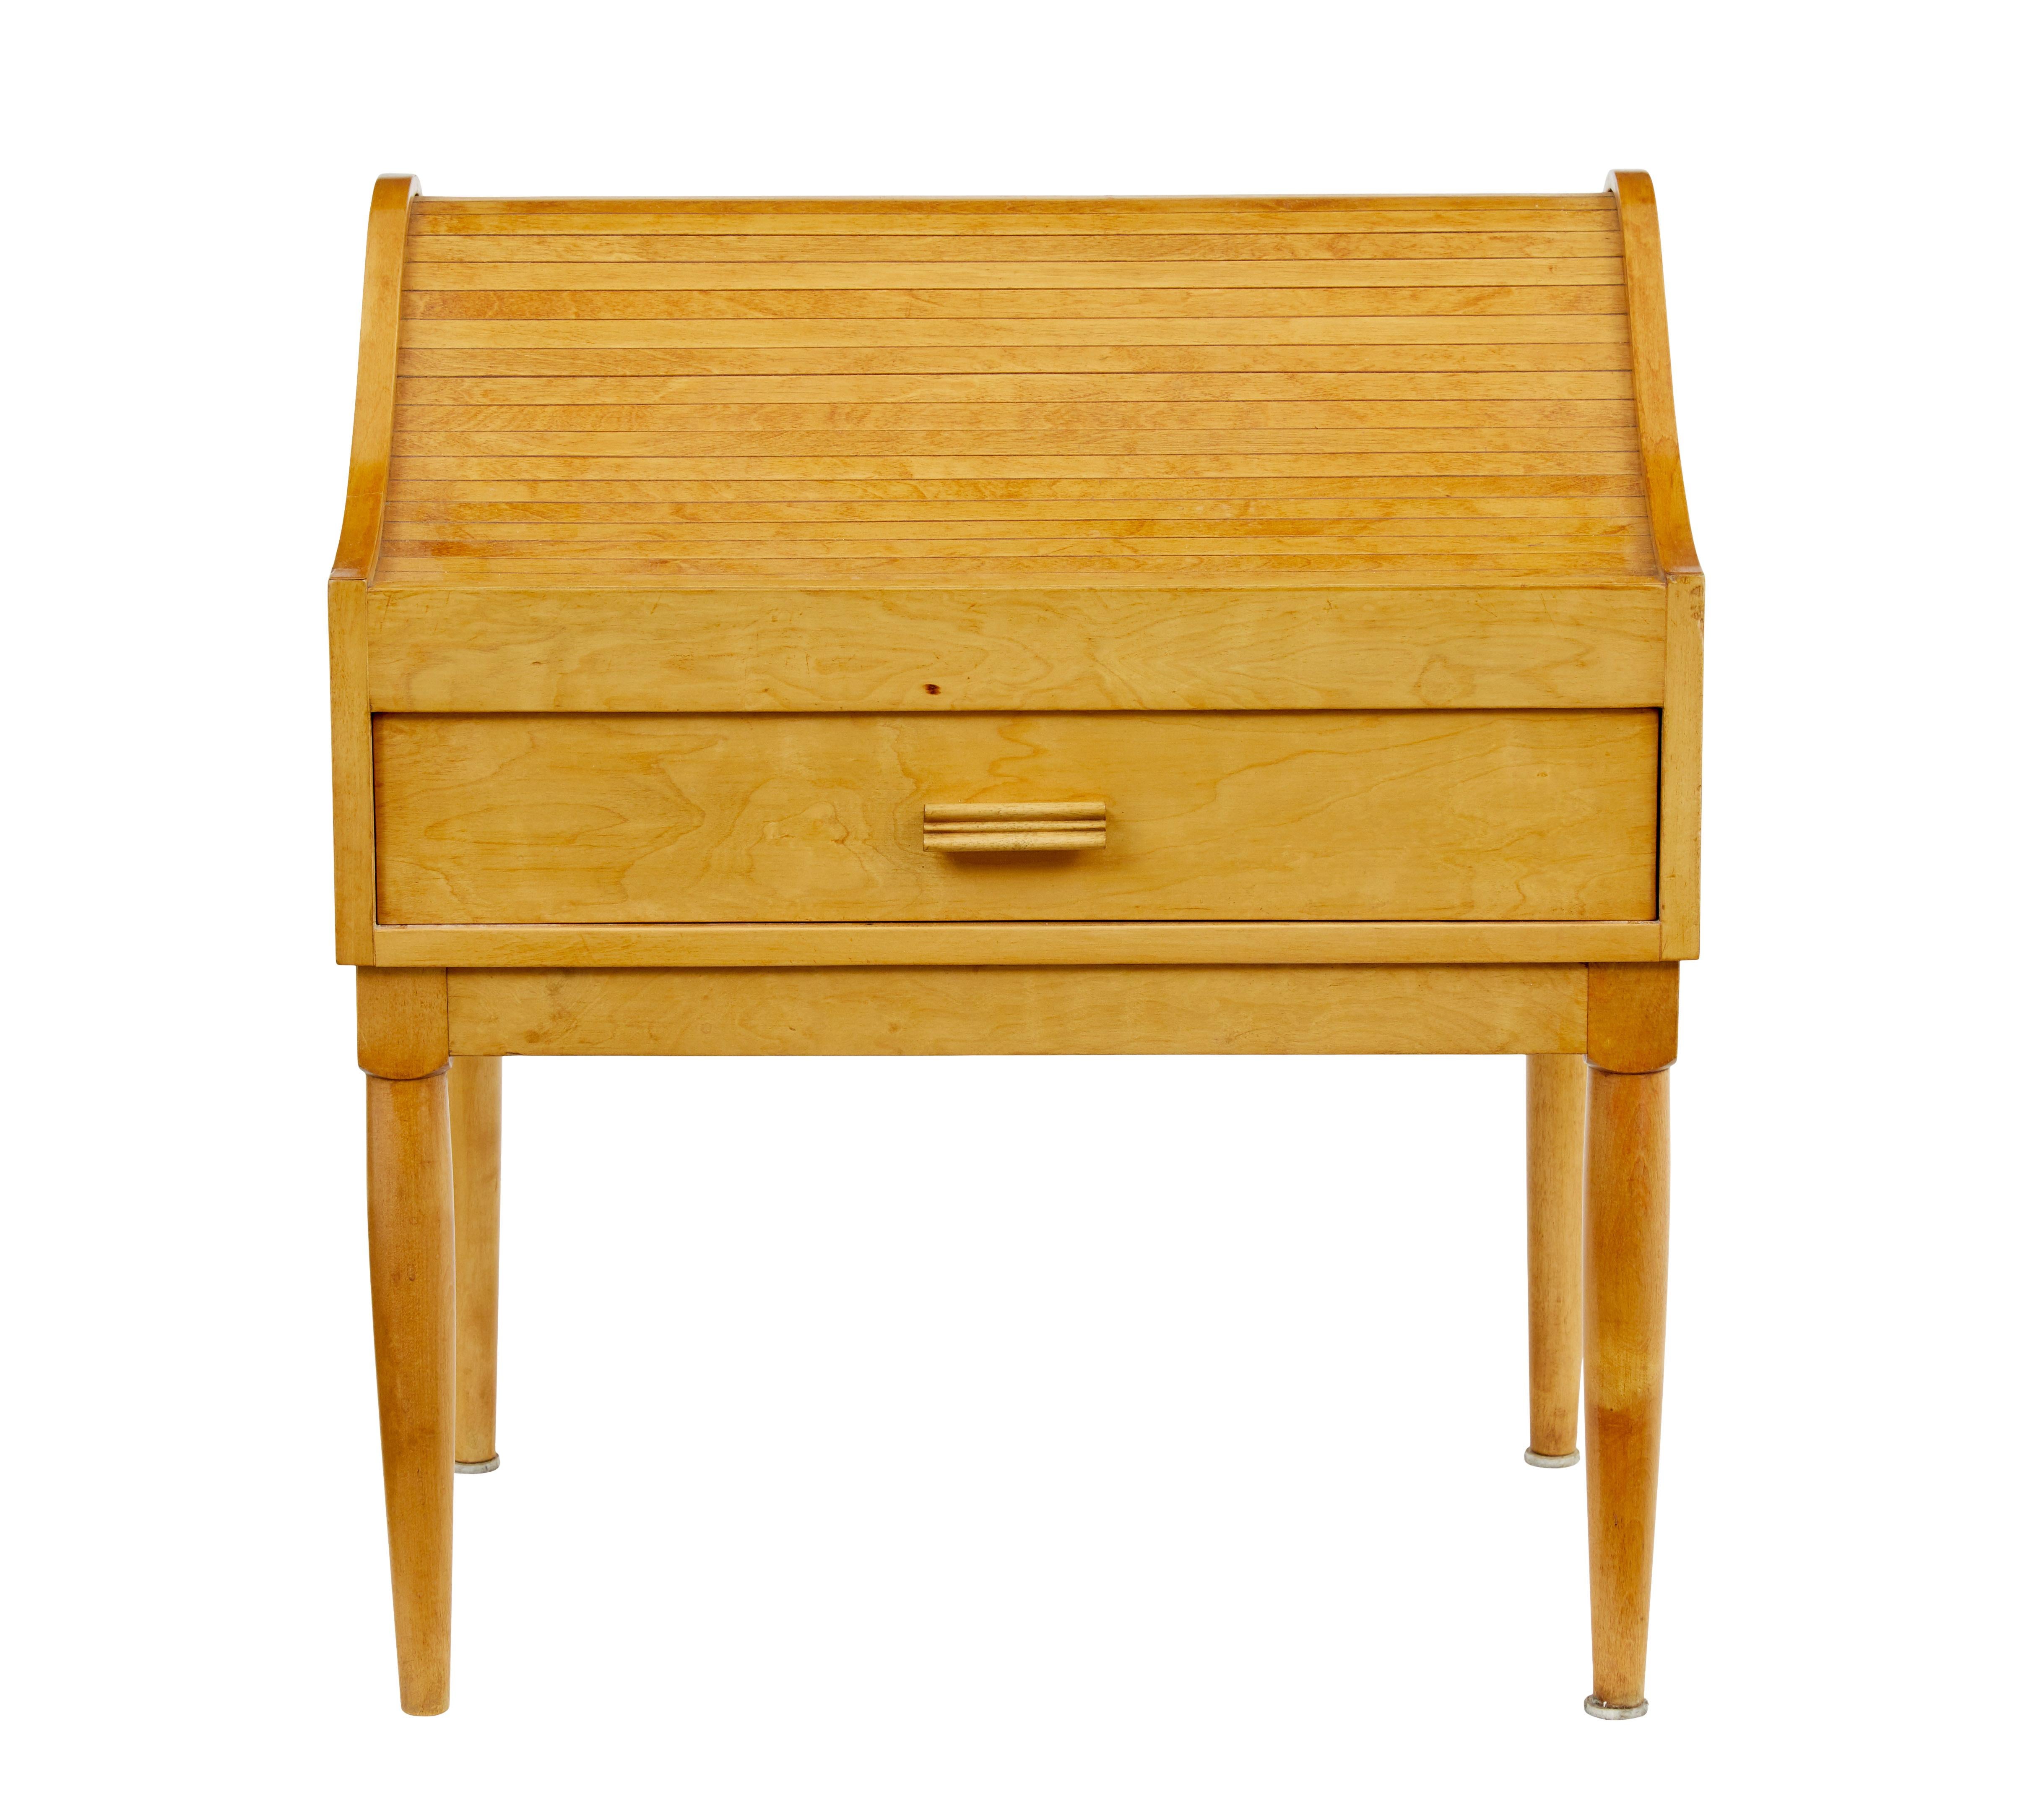 Swedish Mid 20th century birch tambour sewing box on stand For Sale